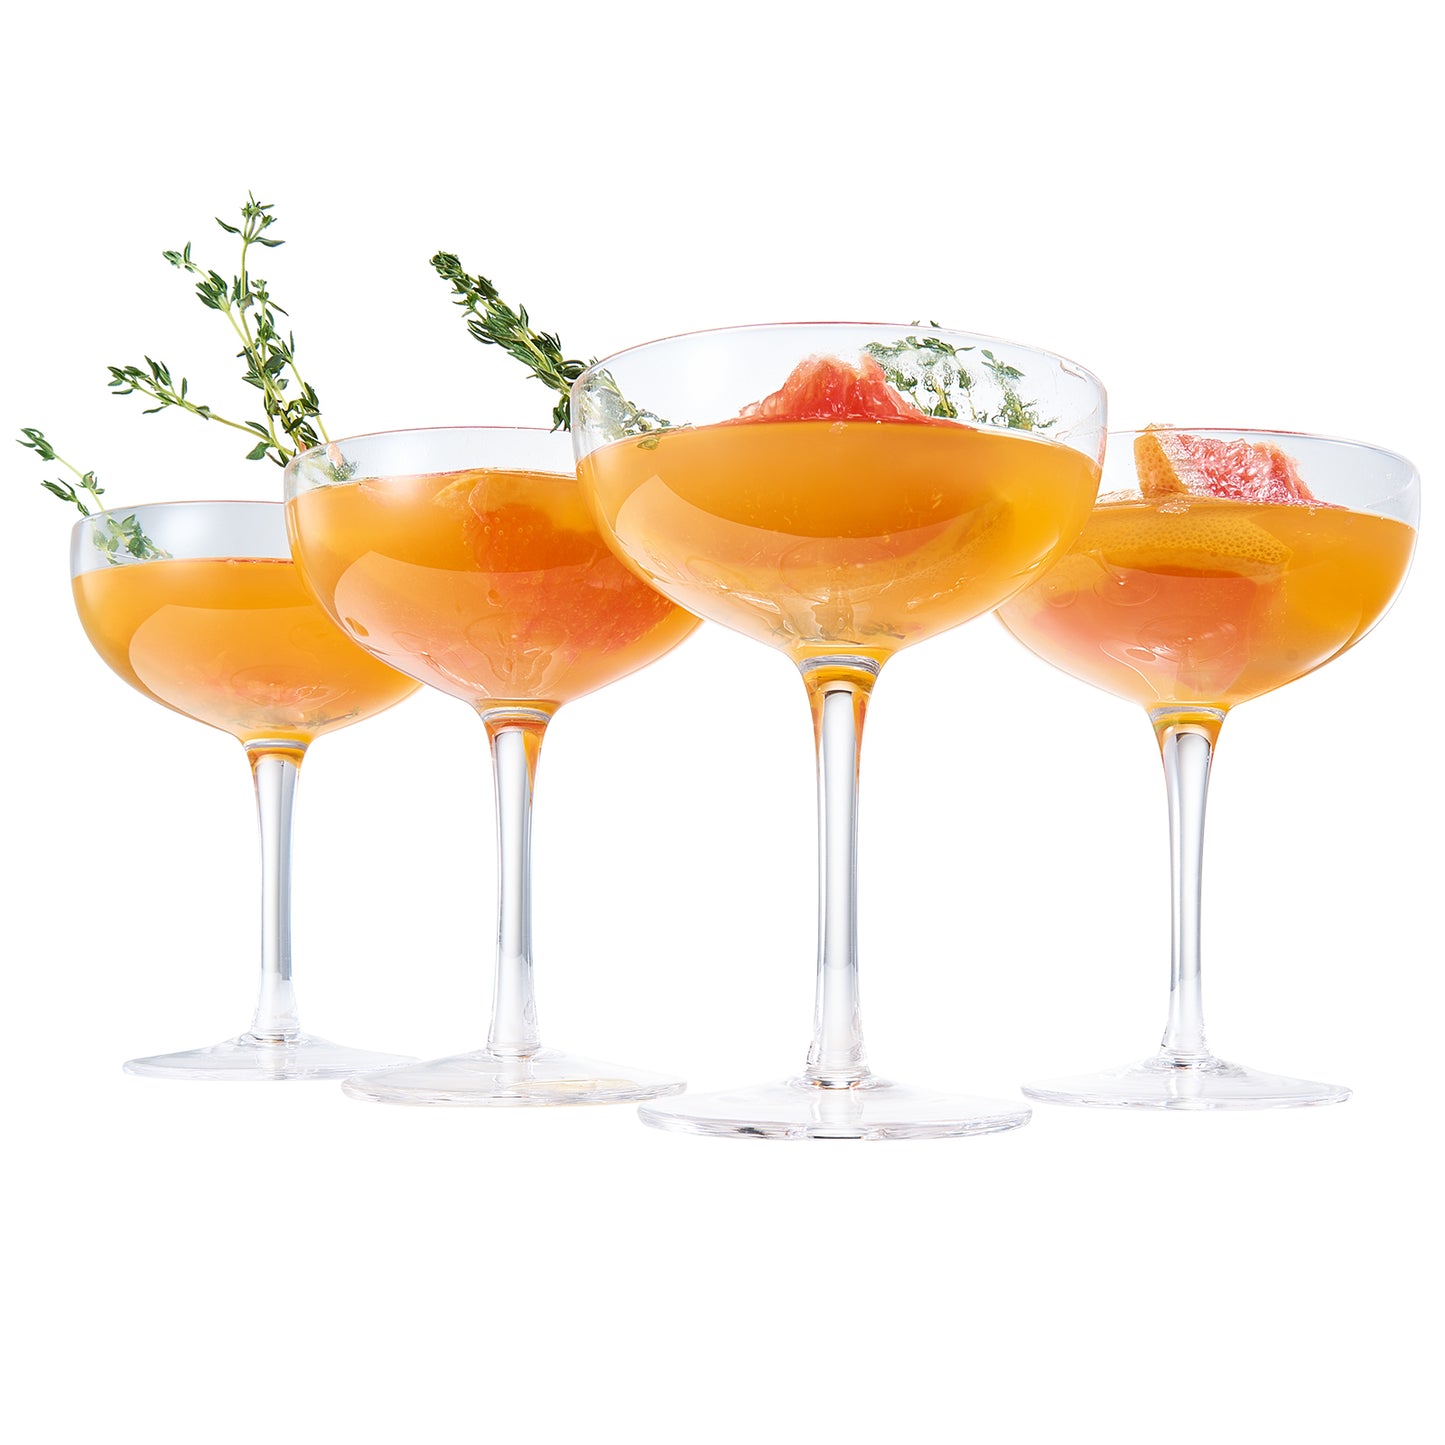 Classica Coupe Cocktail Glassware, Set of 4